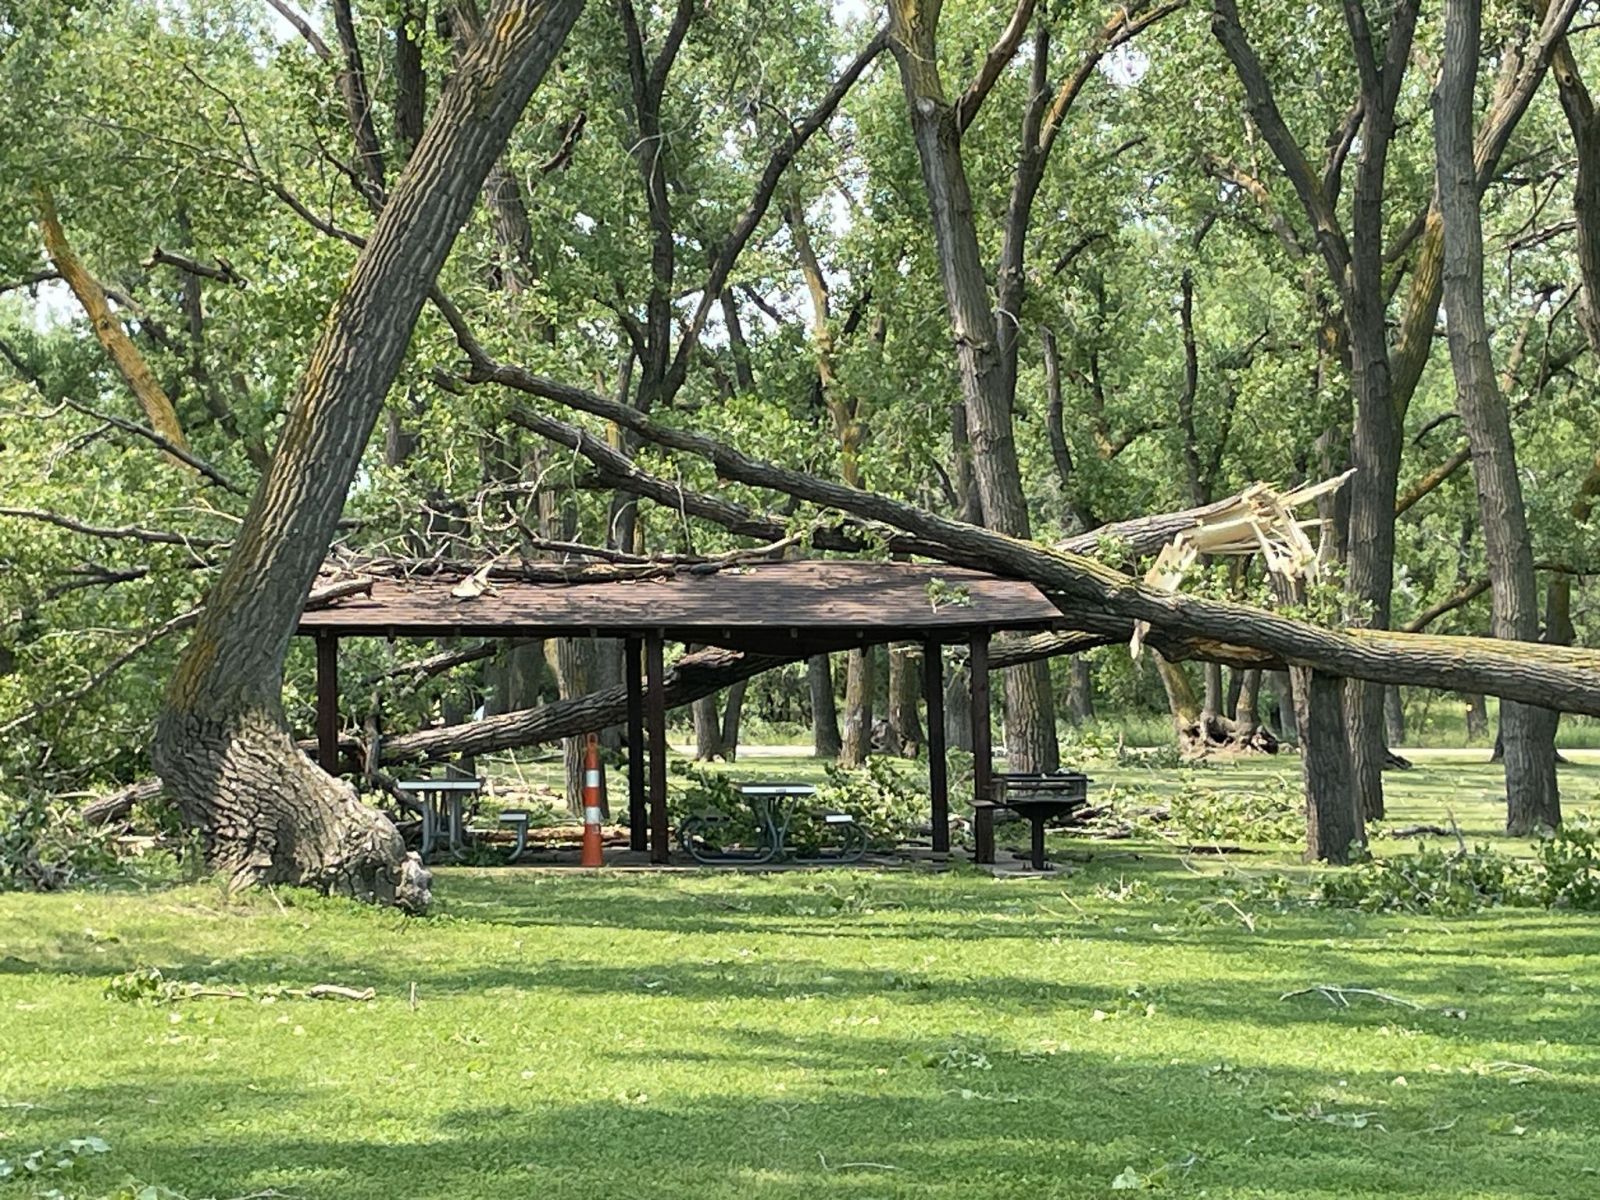 At least two trees knocked down and on a park shelter. Photo credit DRG Media Group.